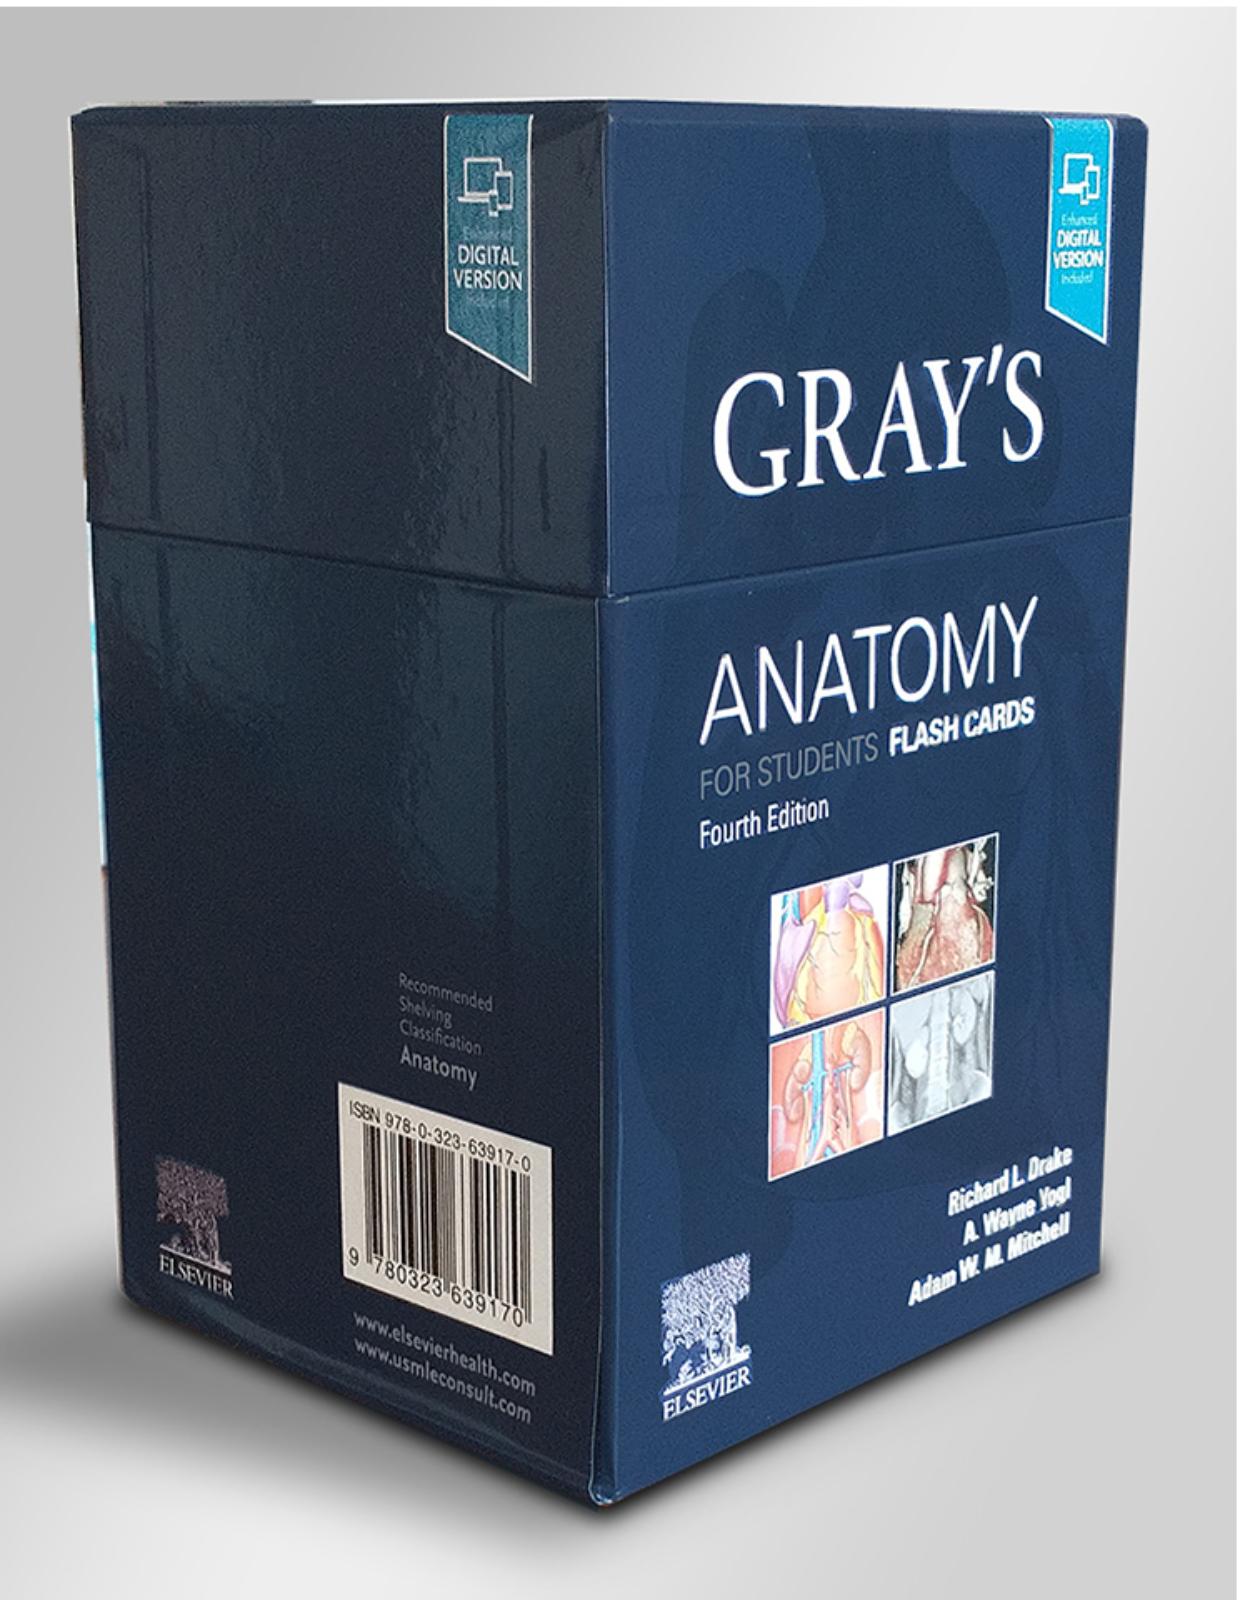 Gray’s Anatomy for Students Flash Cards 